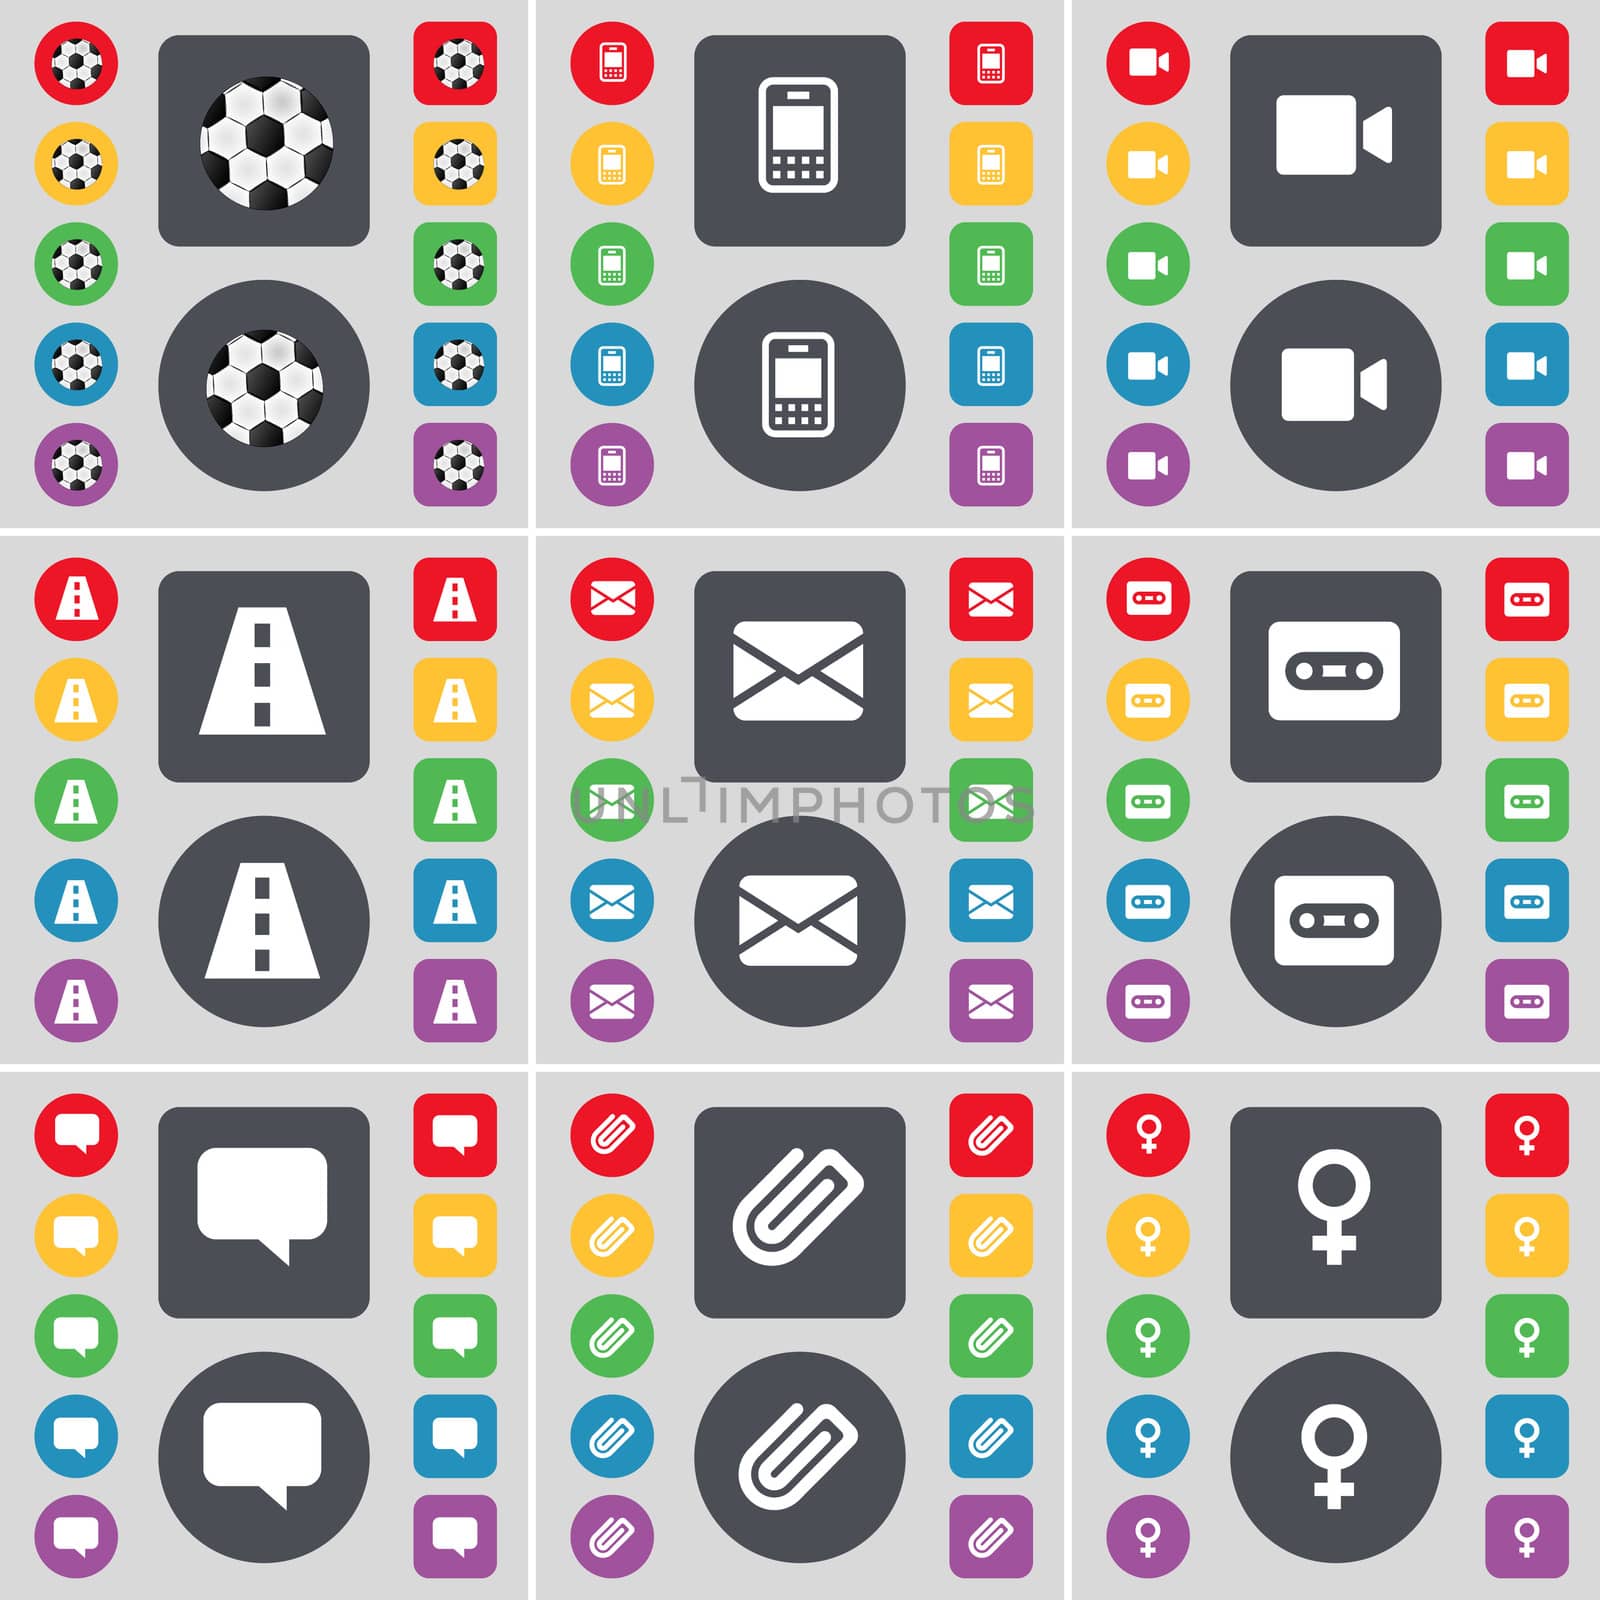 Ball, Mobile phone, Video camera, Road, Message, Cassette, Chat bubble, Clip, Venus symbol icon symbol. A large set of flat, colored buttons for your design. illustration